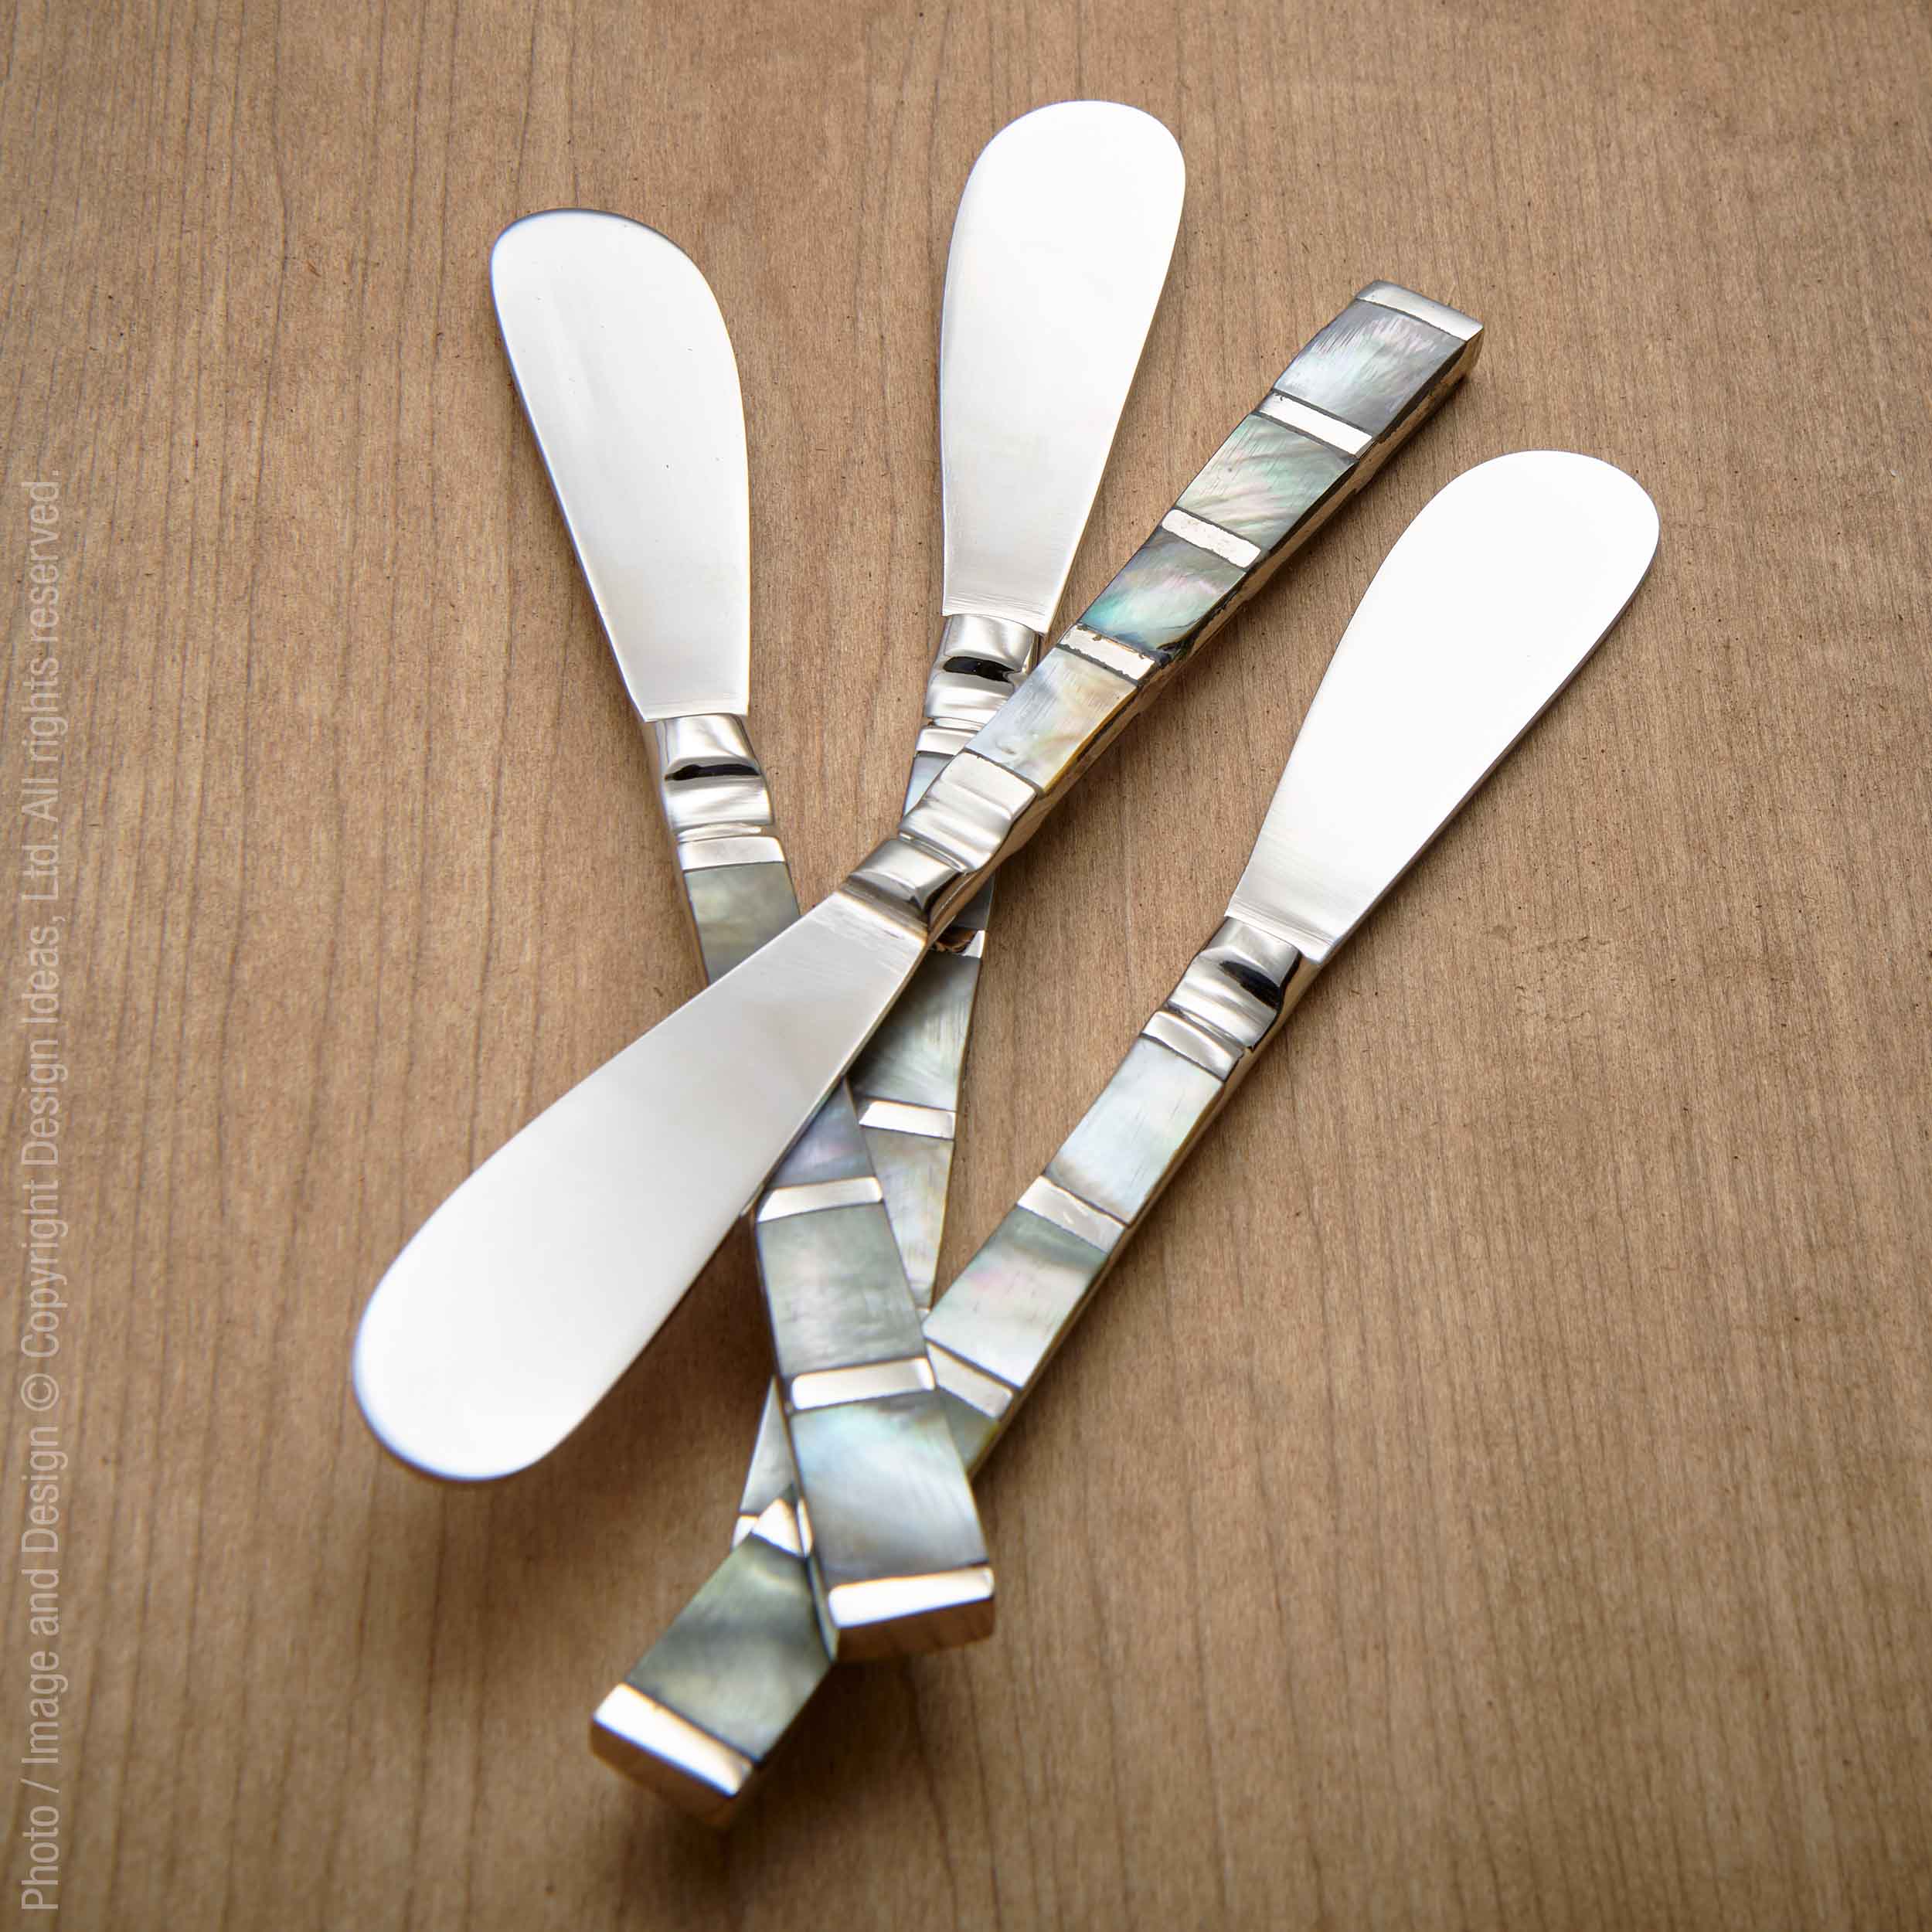 Abalon™ spreaders - Silver | Image 1 | Premium Utensils from the Abalon collection | made with Stainless Steel for long lasting use | texxture